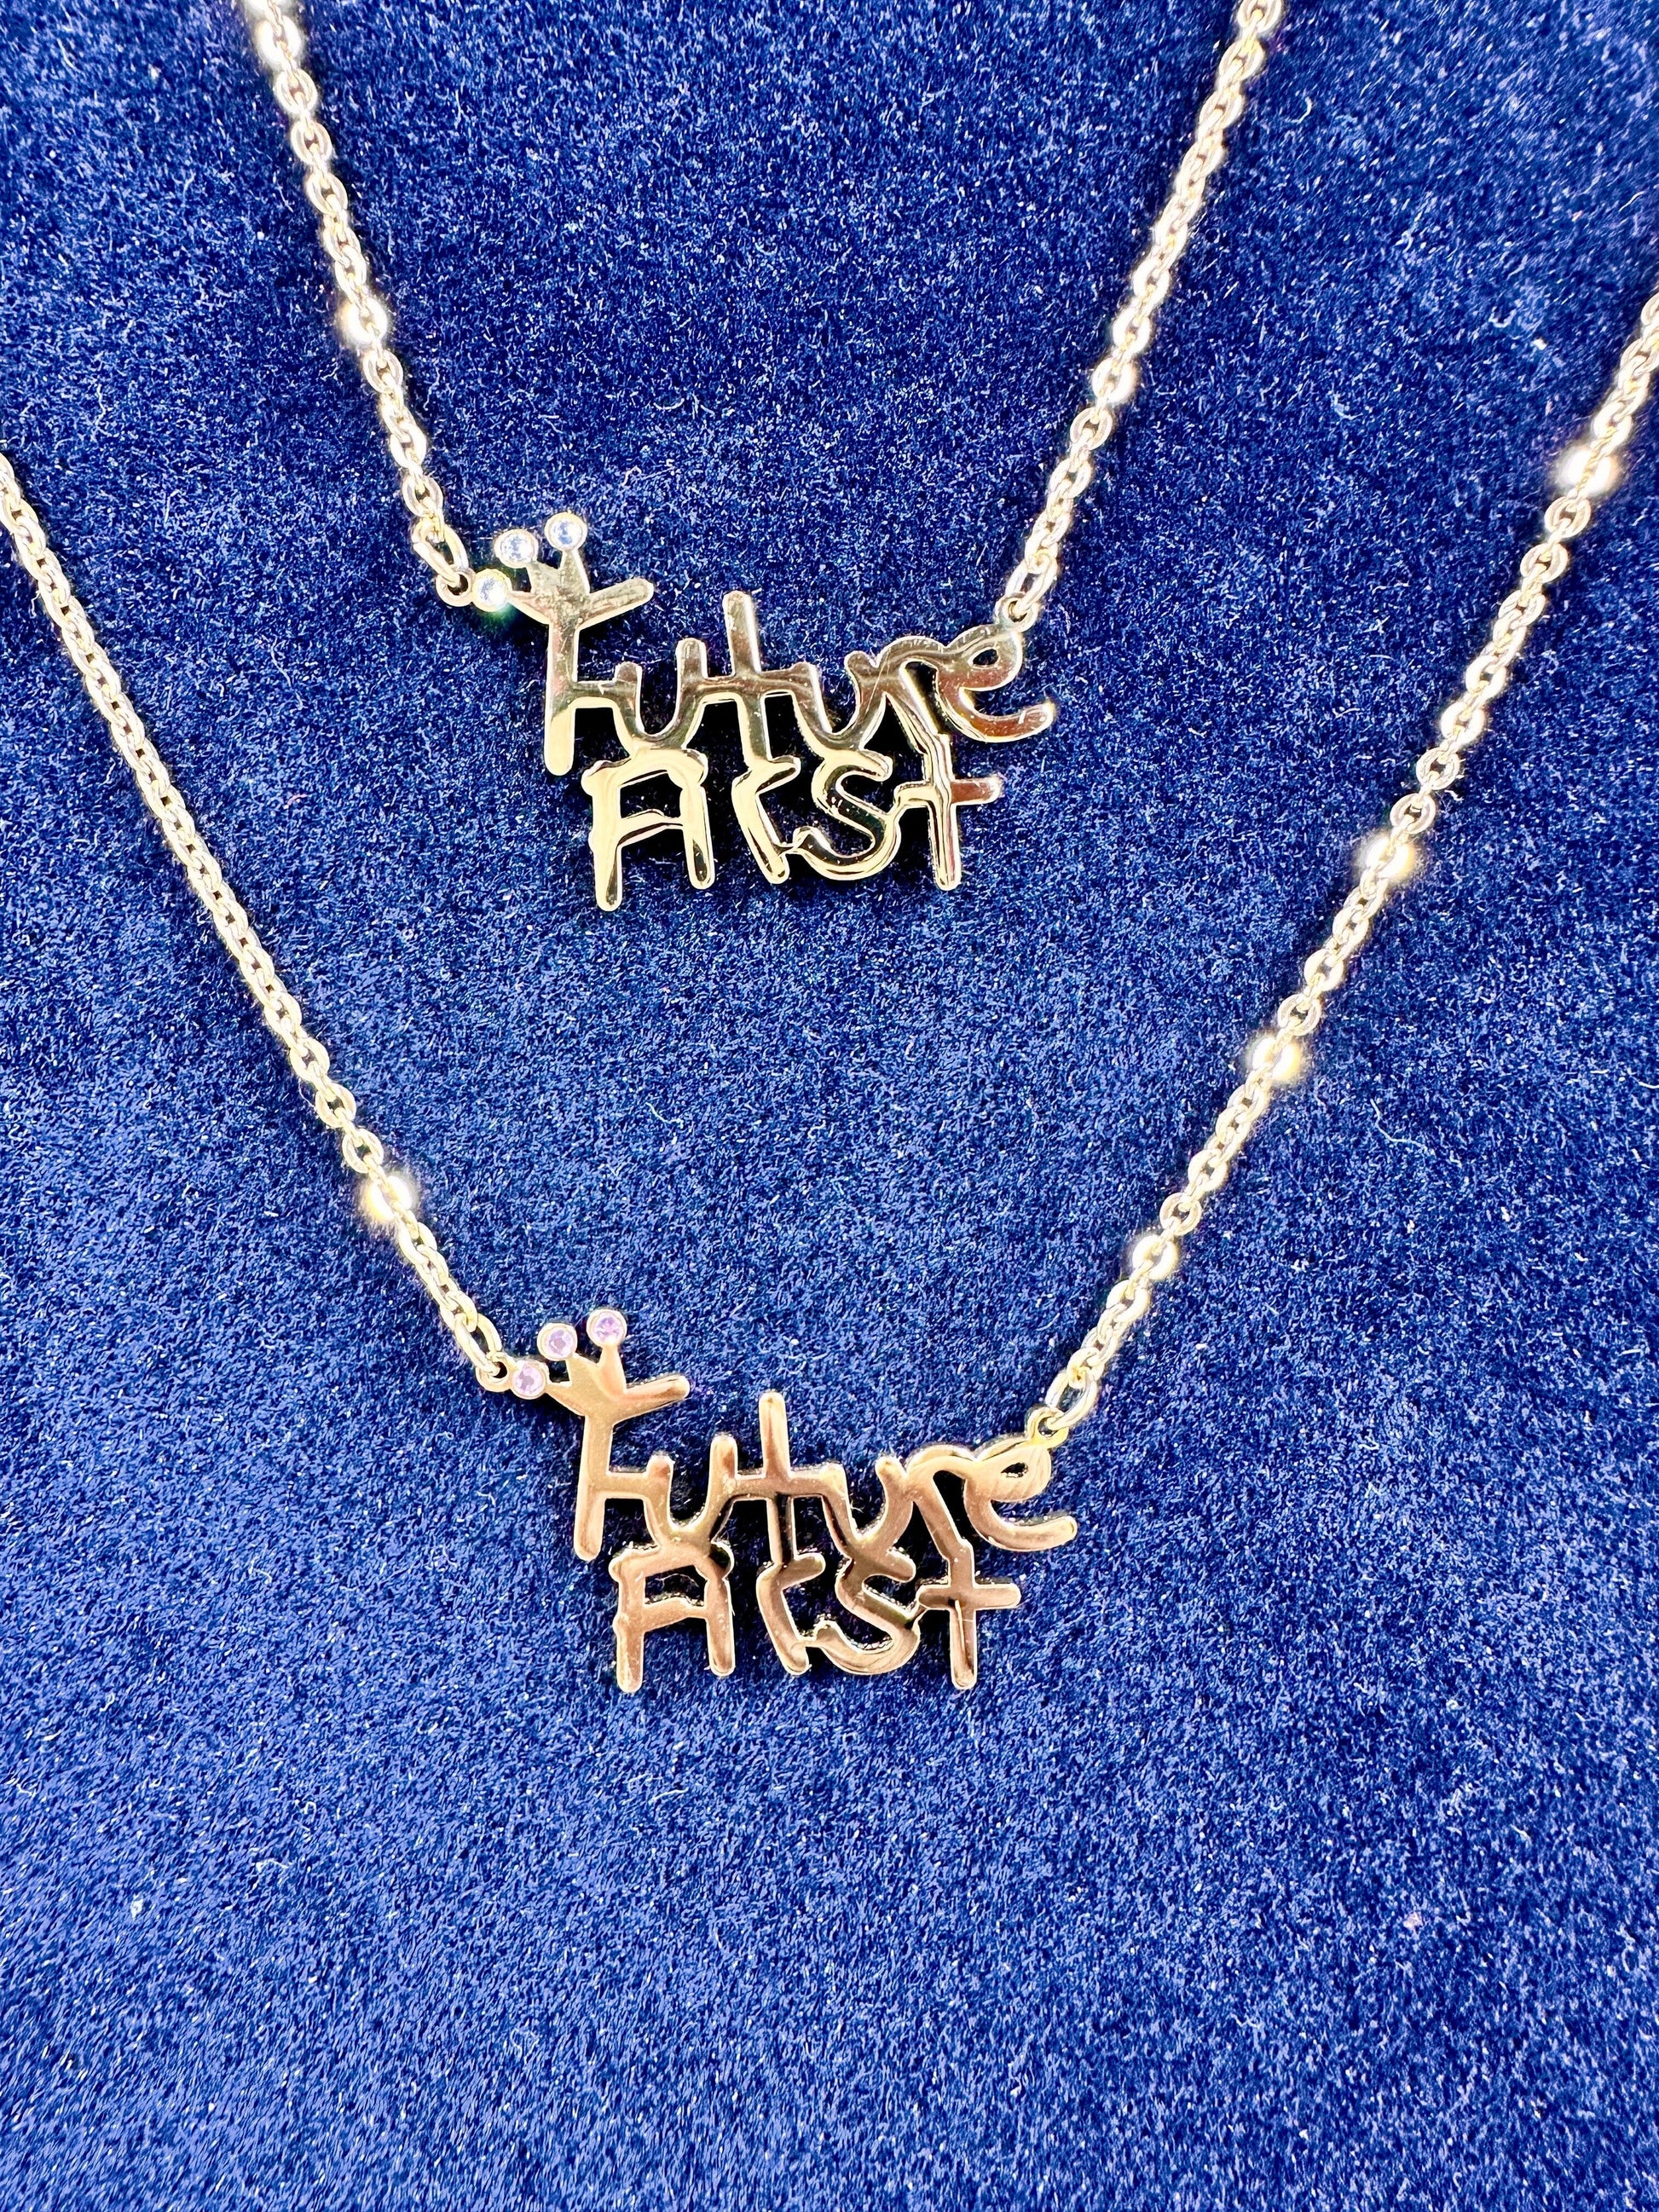 Future First Gold Necklace Necklaces Trendzio Jewelry 